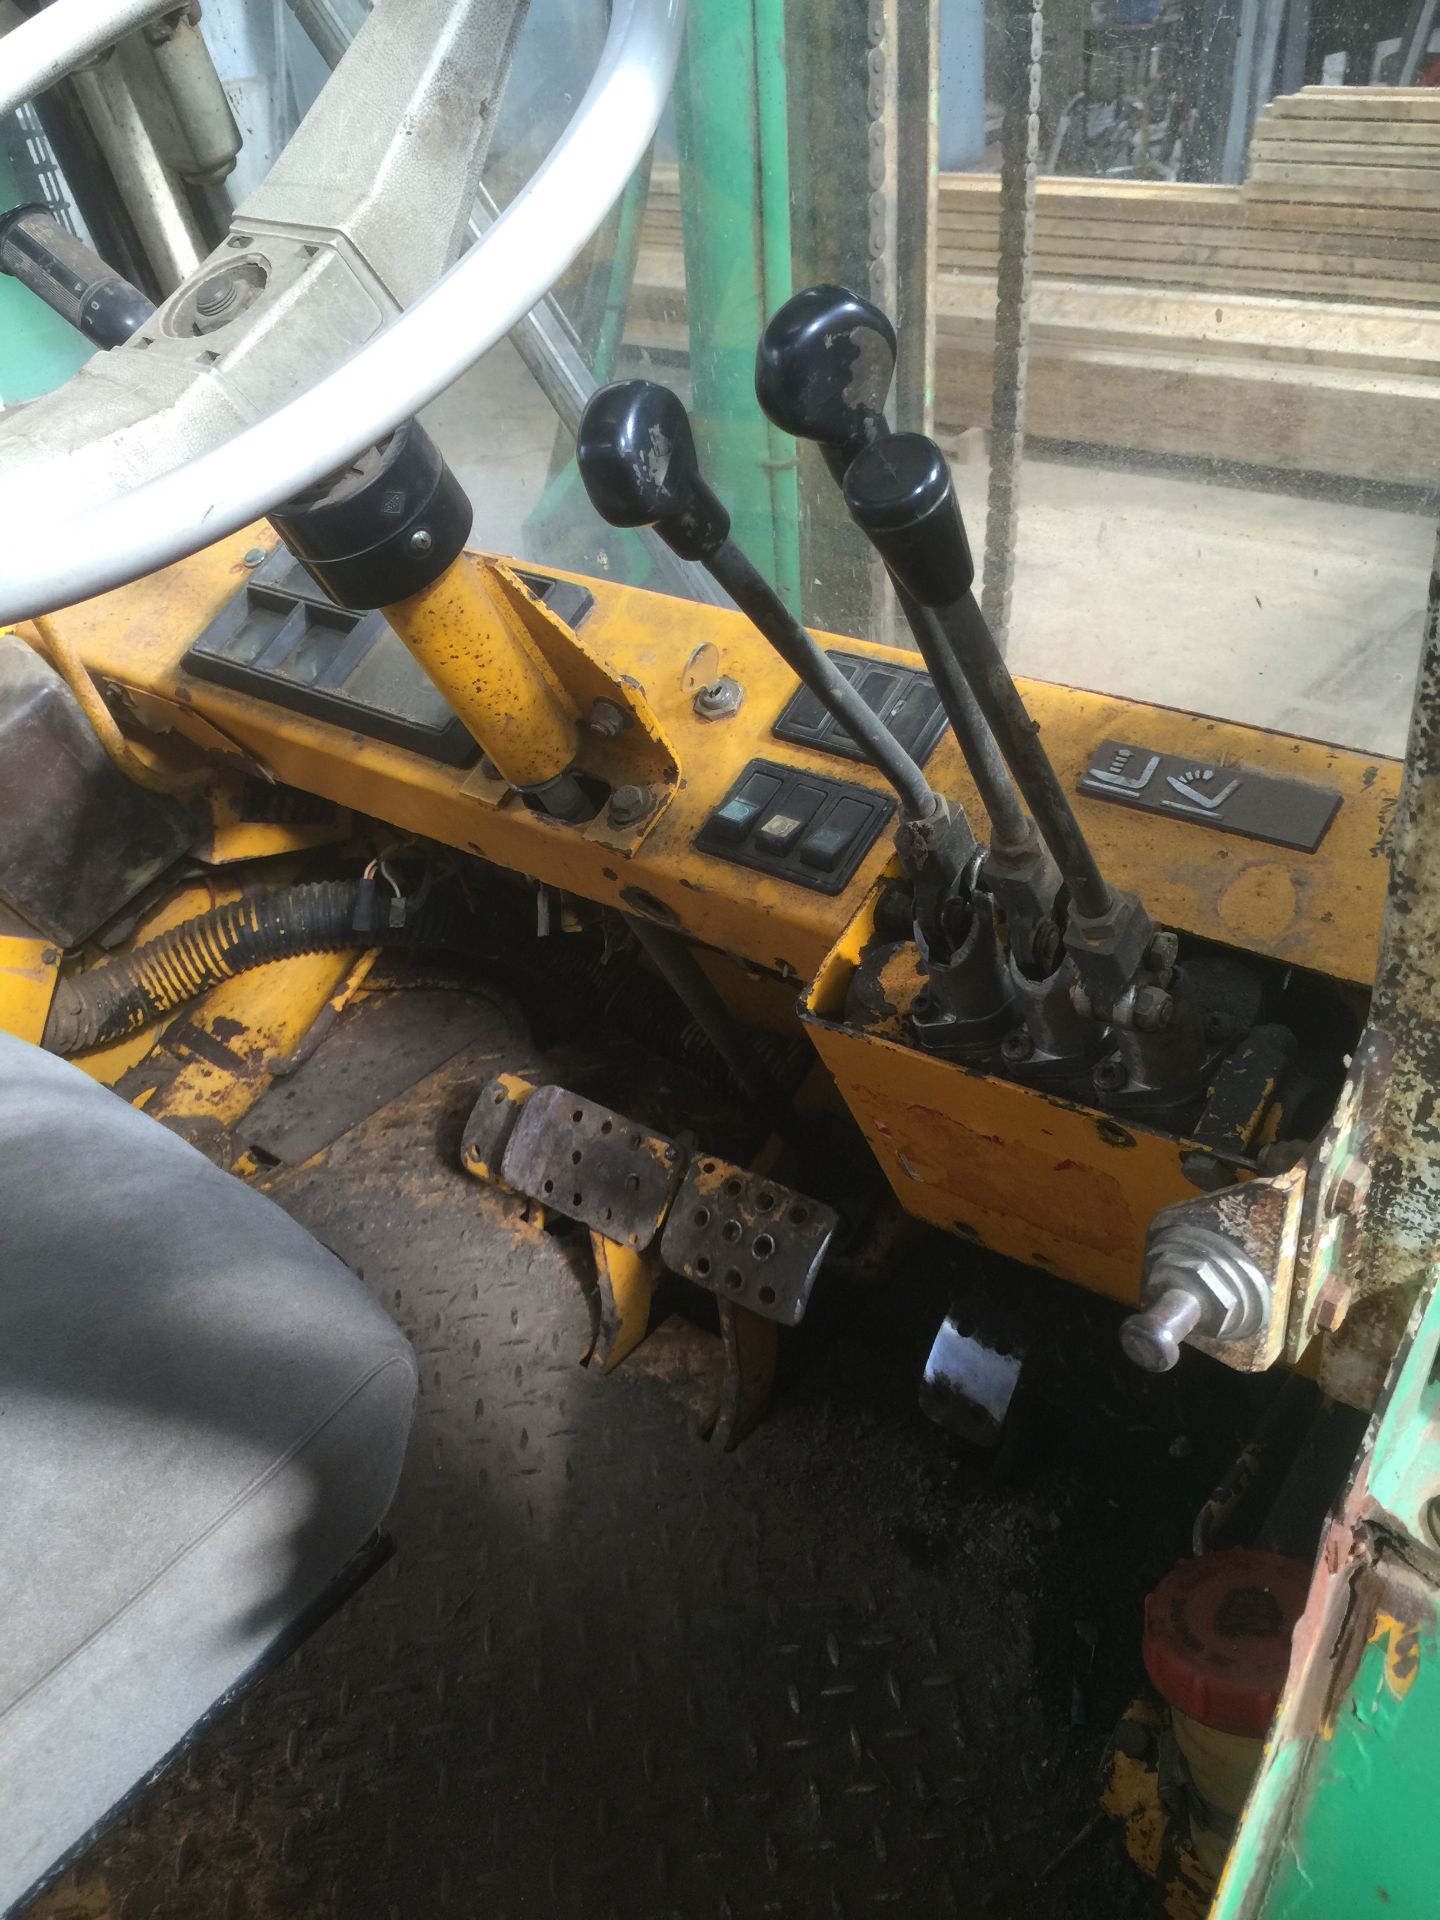 JCB 926 Lift Truck 4282 hours - old but in good working order, starts first time. (extension tines - Image 5 of 11